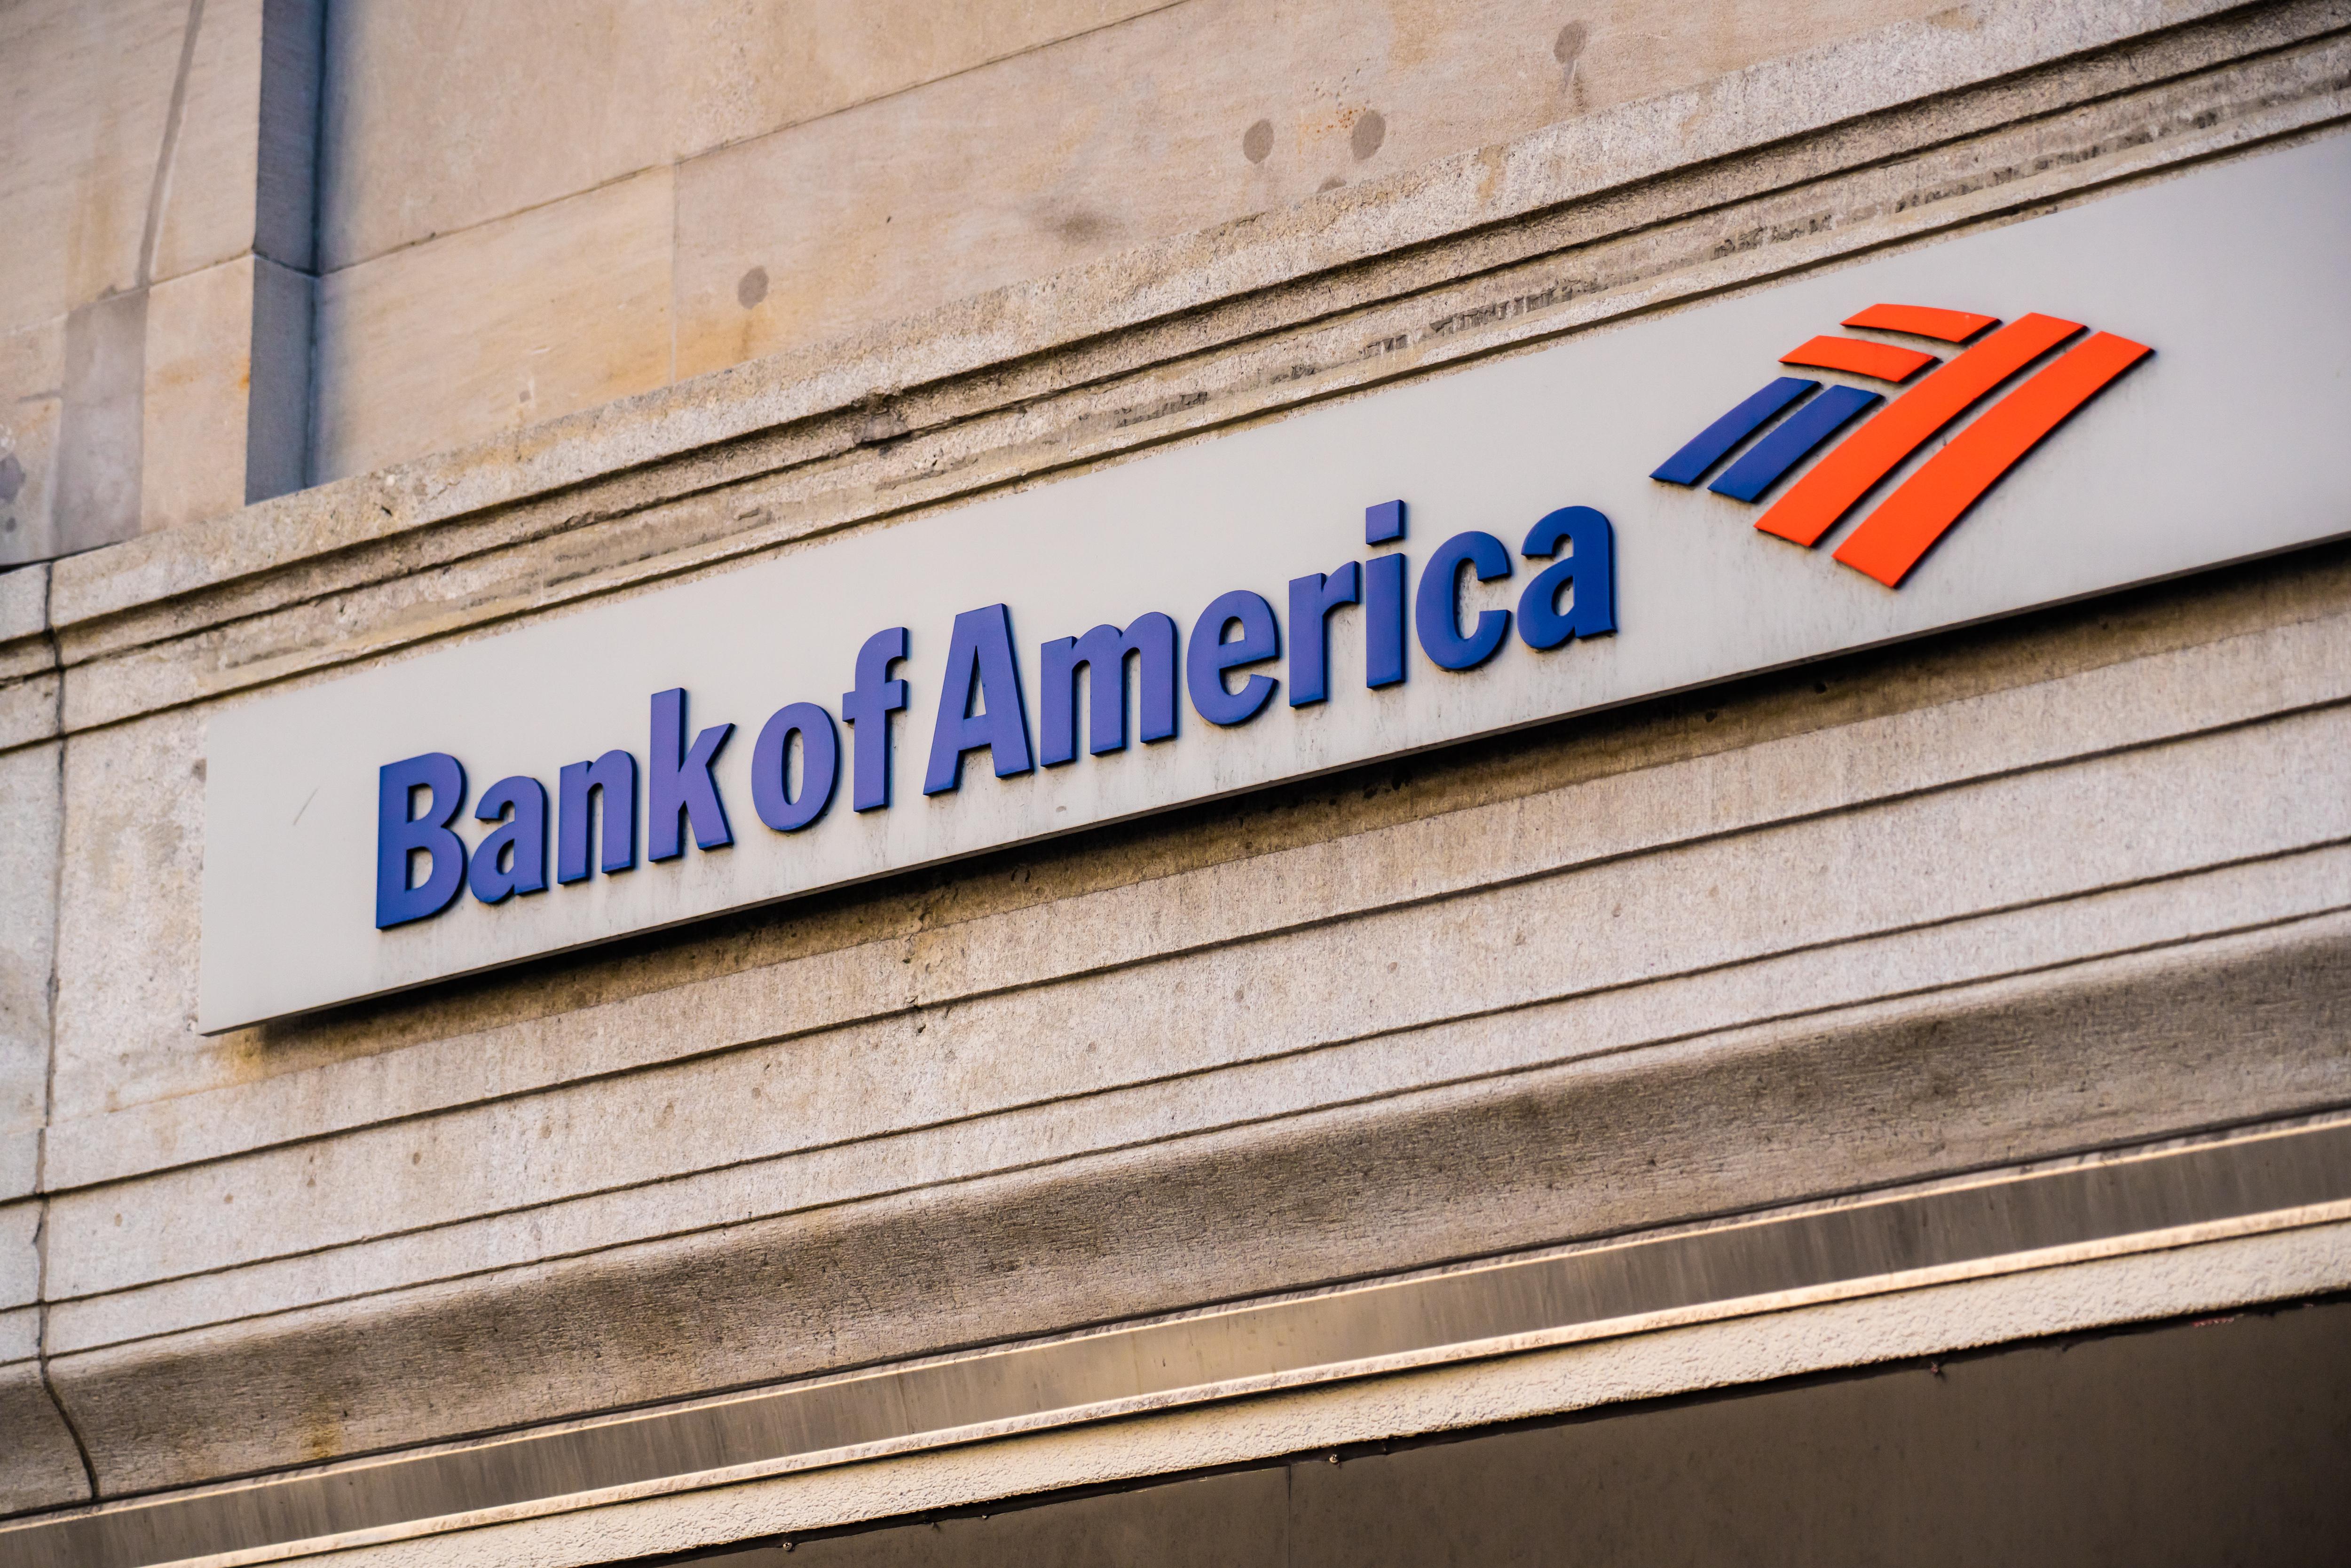 Bank of America Credit Card: Costumized Cash Rewards - Why to Apply?